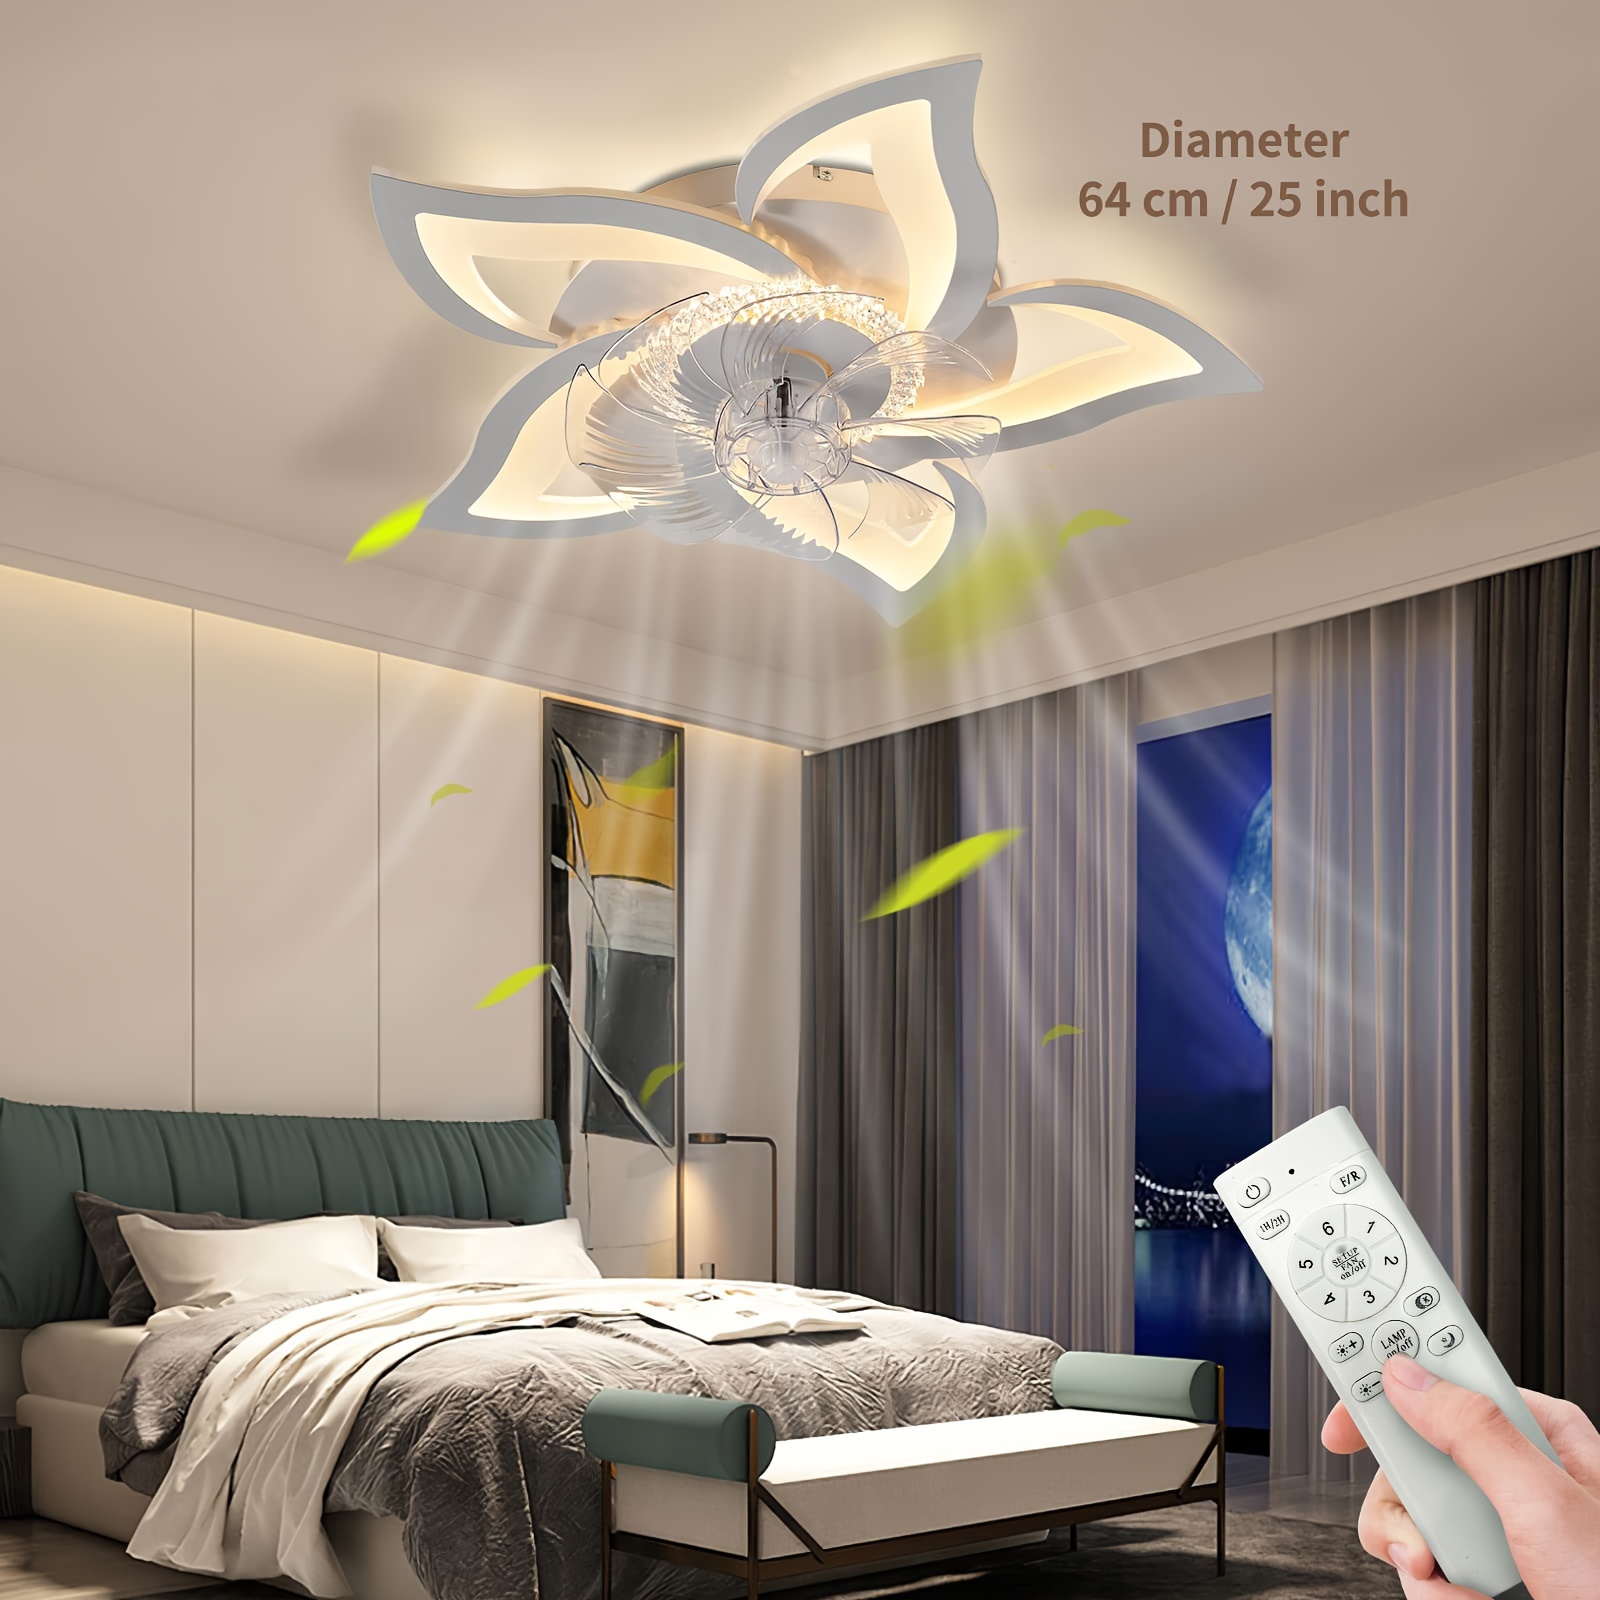 

Ceiling Fan With Light - Modern Ceiling Fan With Smart Led Light And Remote Control, 6 Speeds, 3 Colors, Dimmable For Living Room, Bedroom, And Kitchen